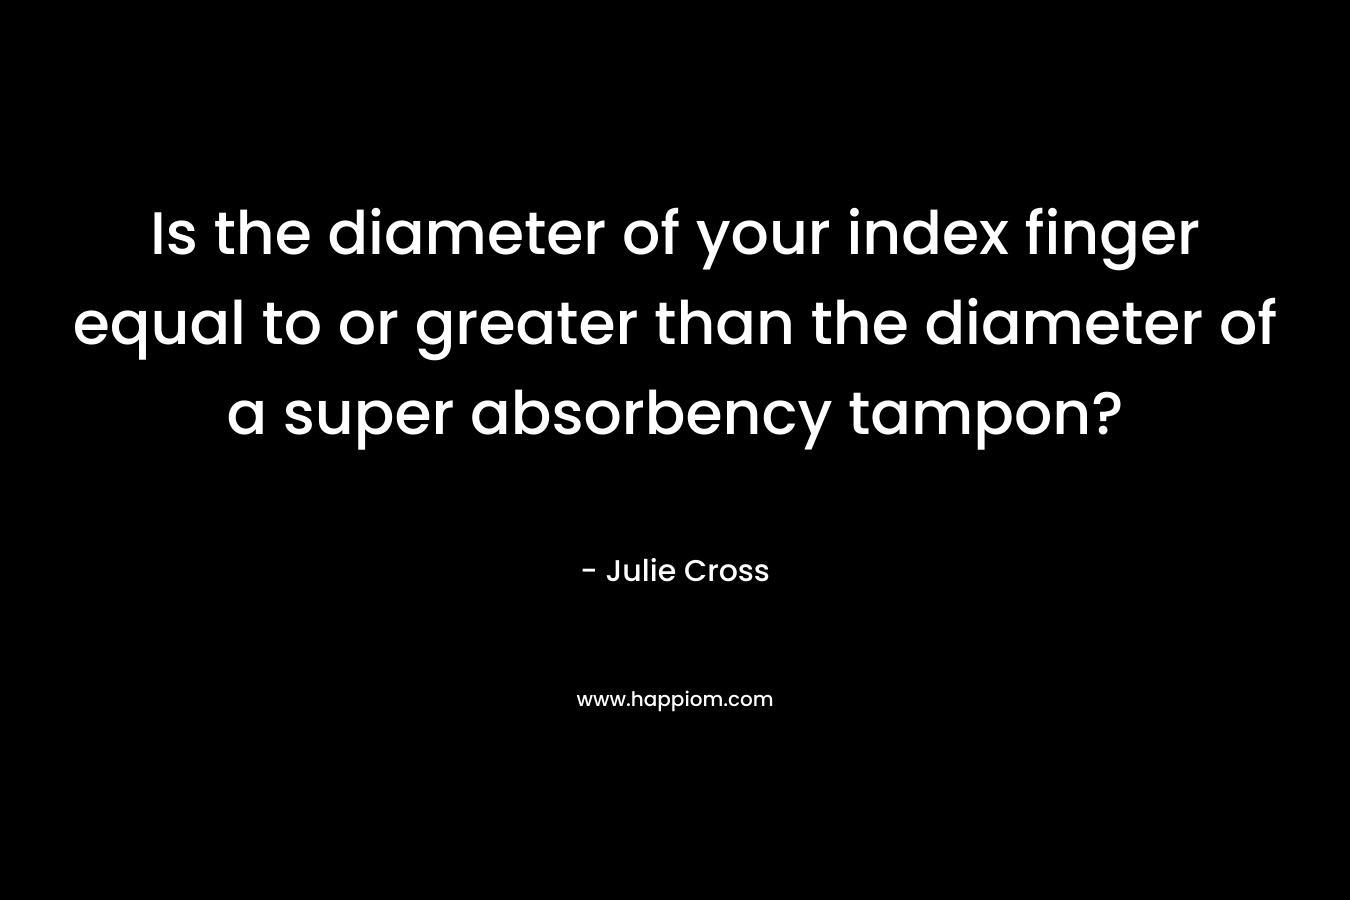 Is the diameter of your index finger equal to or greater than the diameter of a super absorbency tampon?